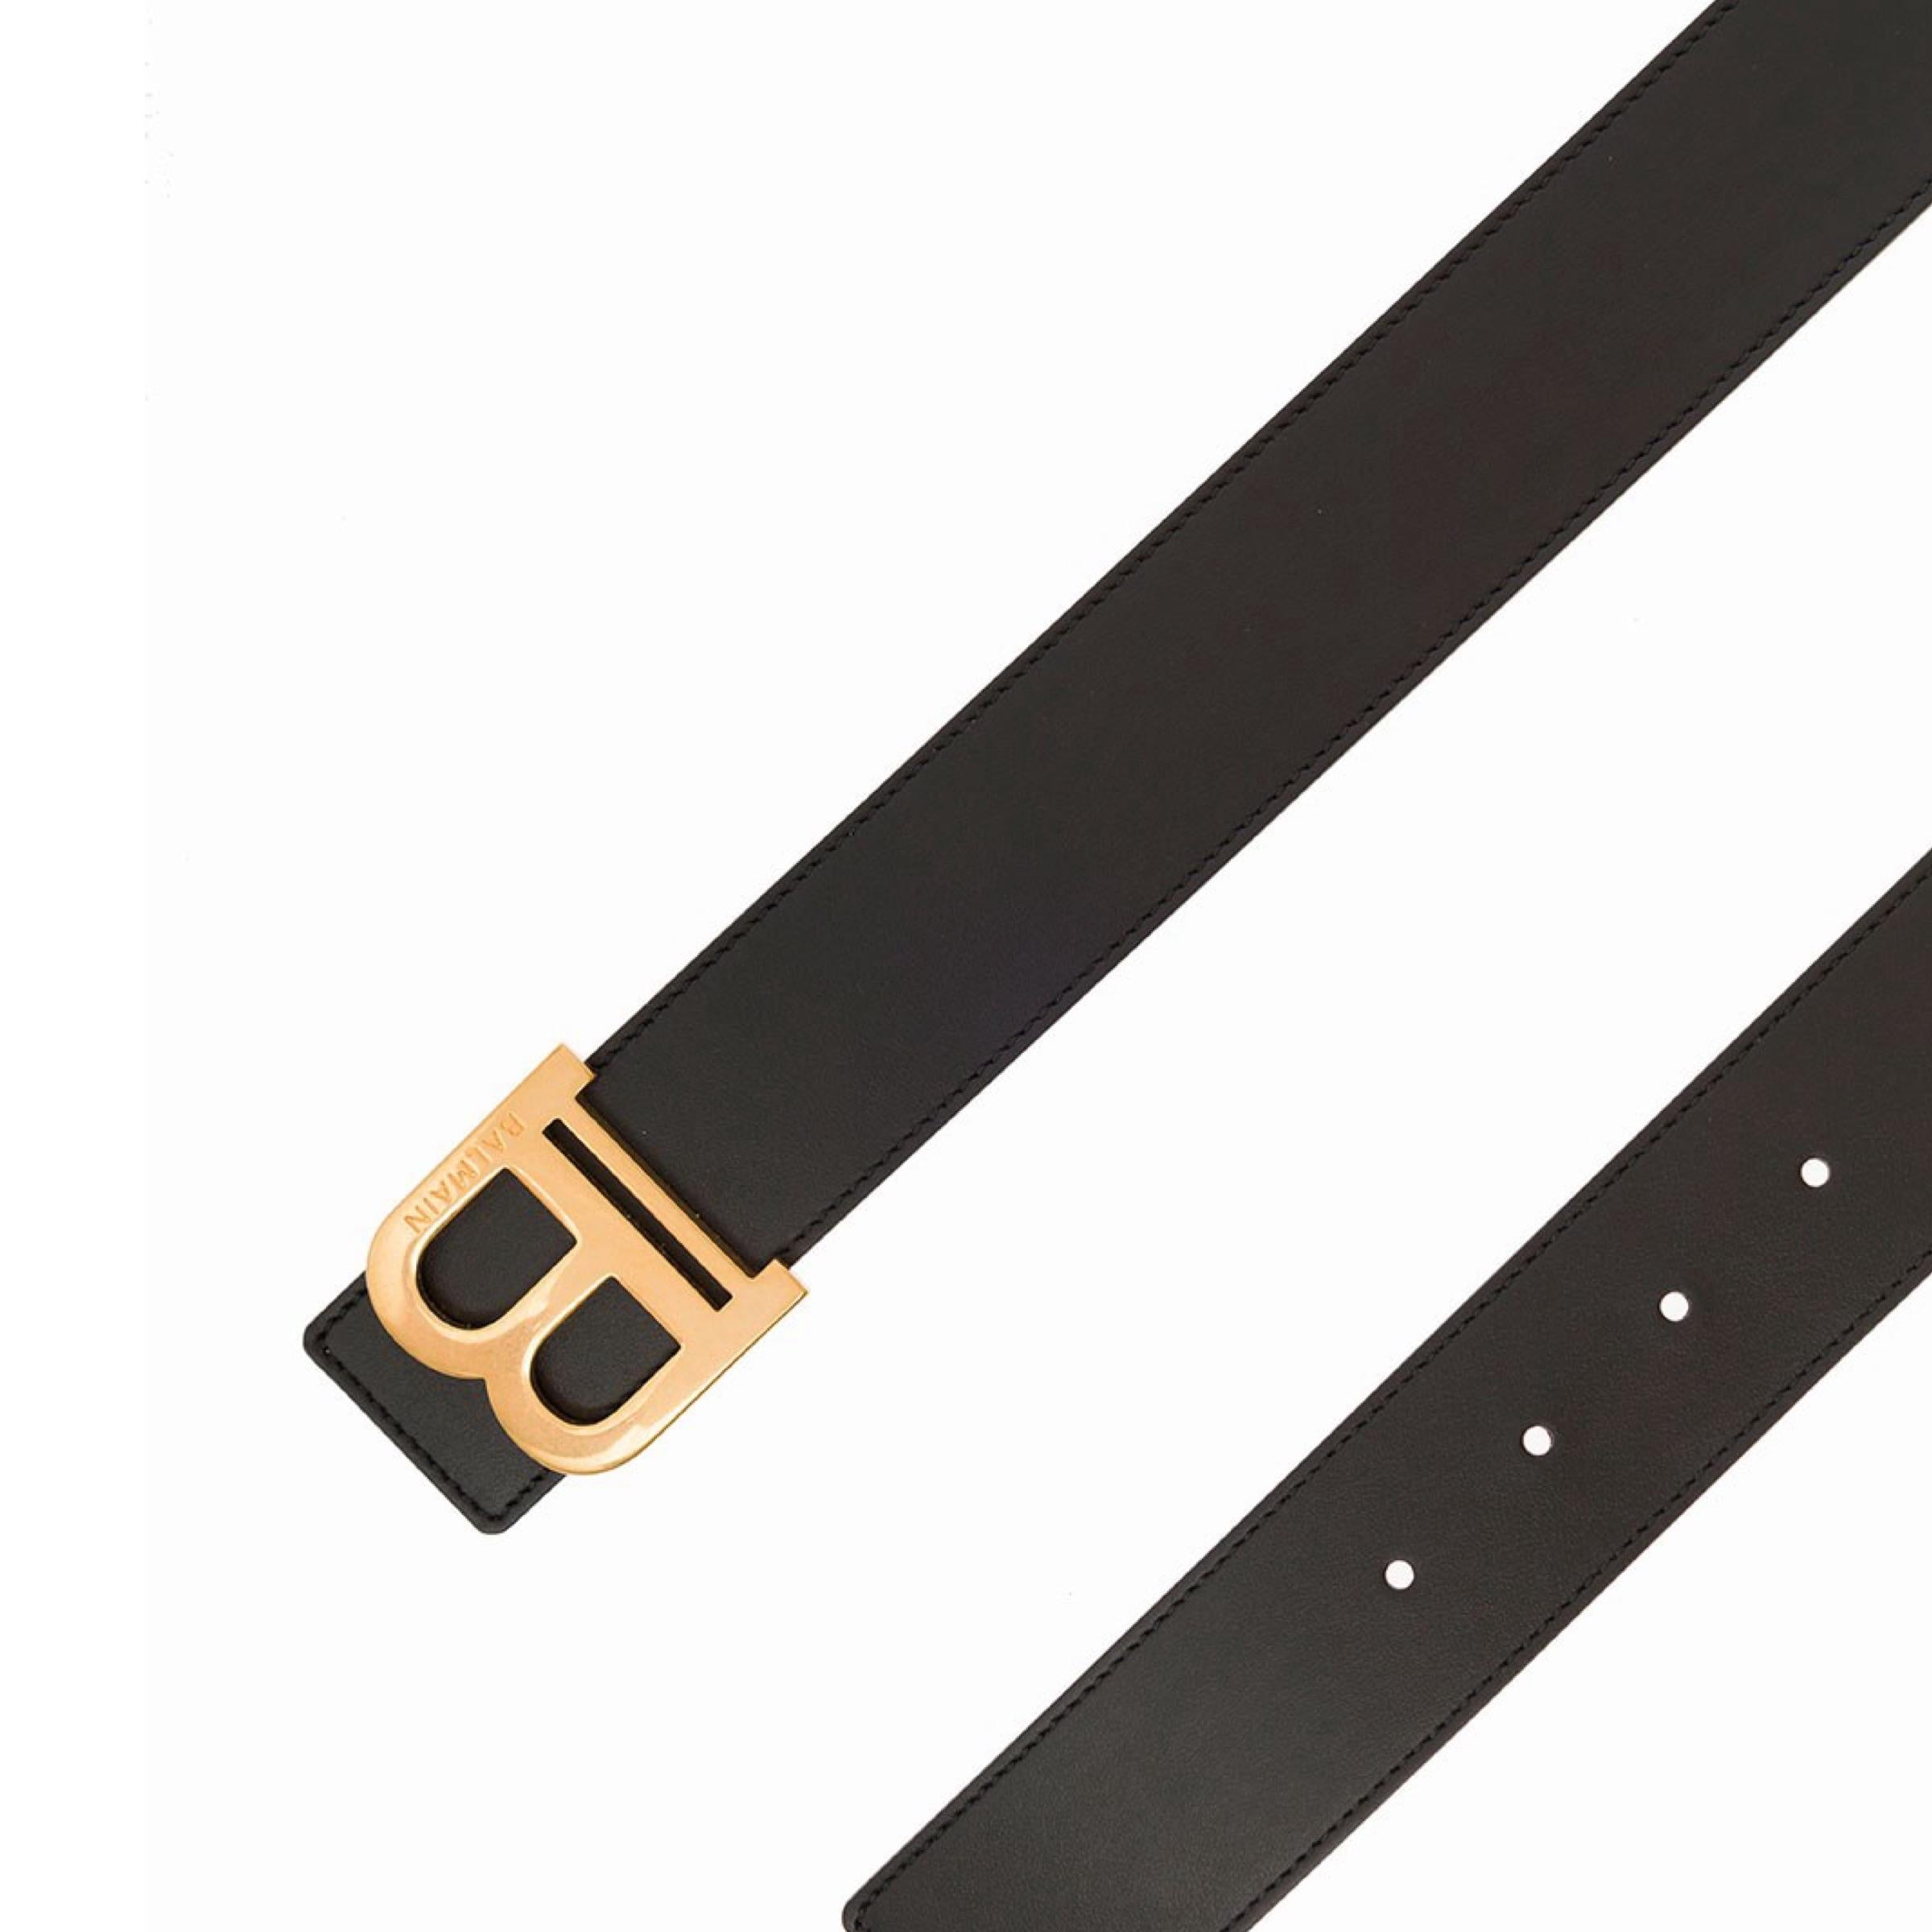 New Balmain Black B Logo Leather Belt Size 85 EU In New Condition For Sale In San Marcos, CA